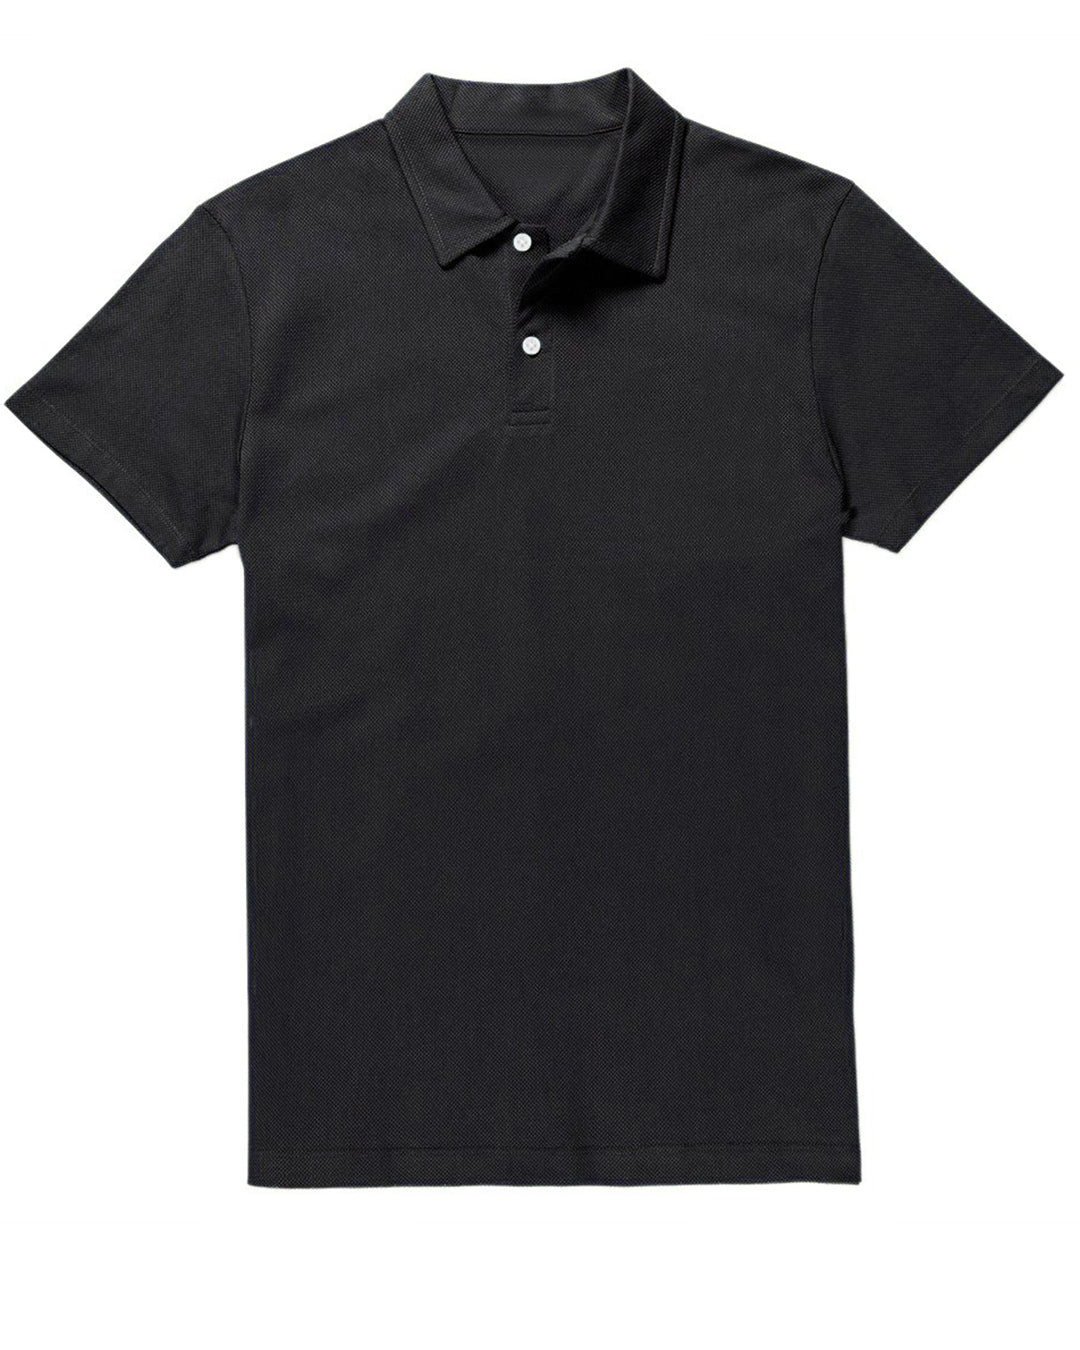 Front of the custom oxford polo shirt for men by Luxire in charcoal grey